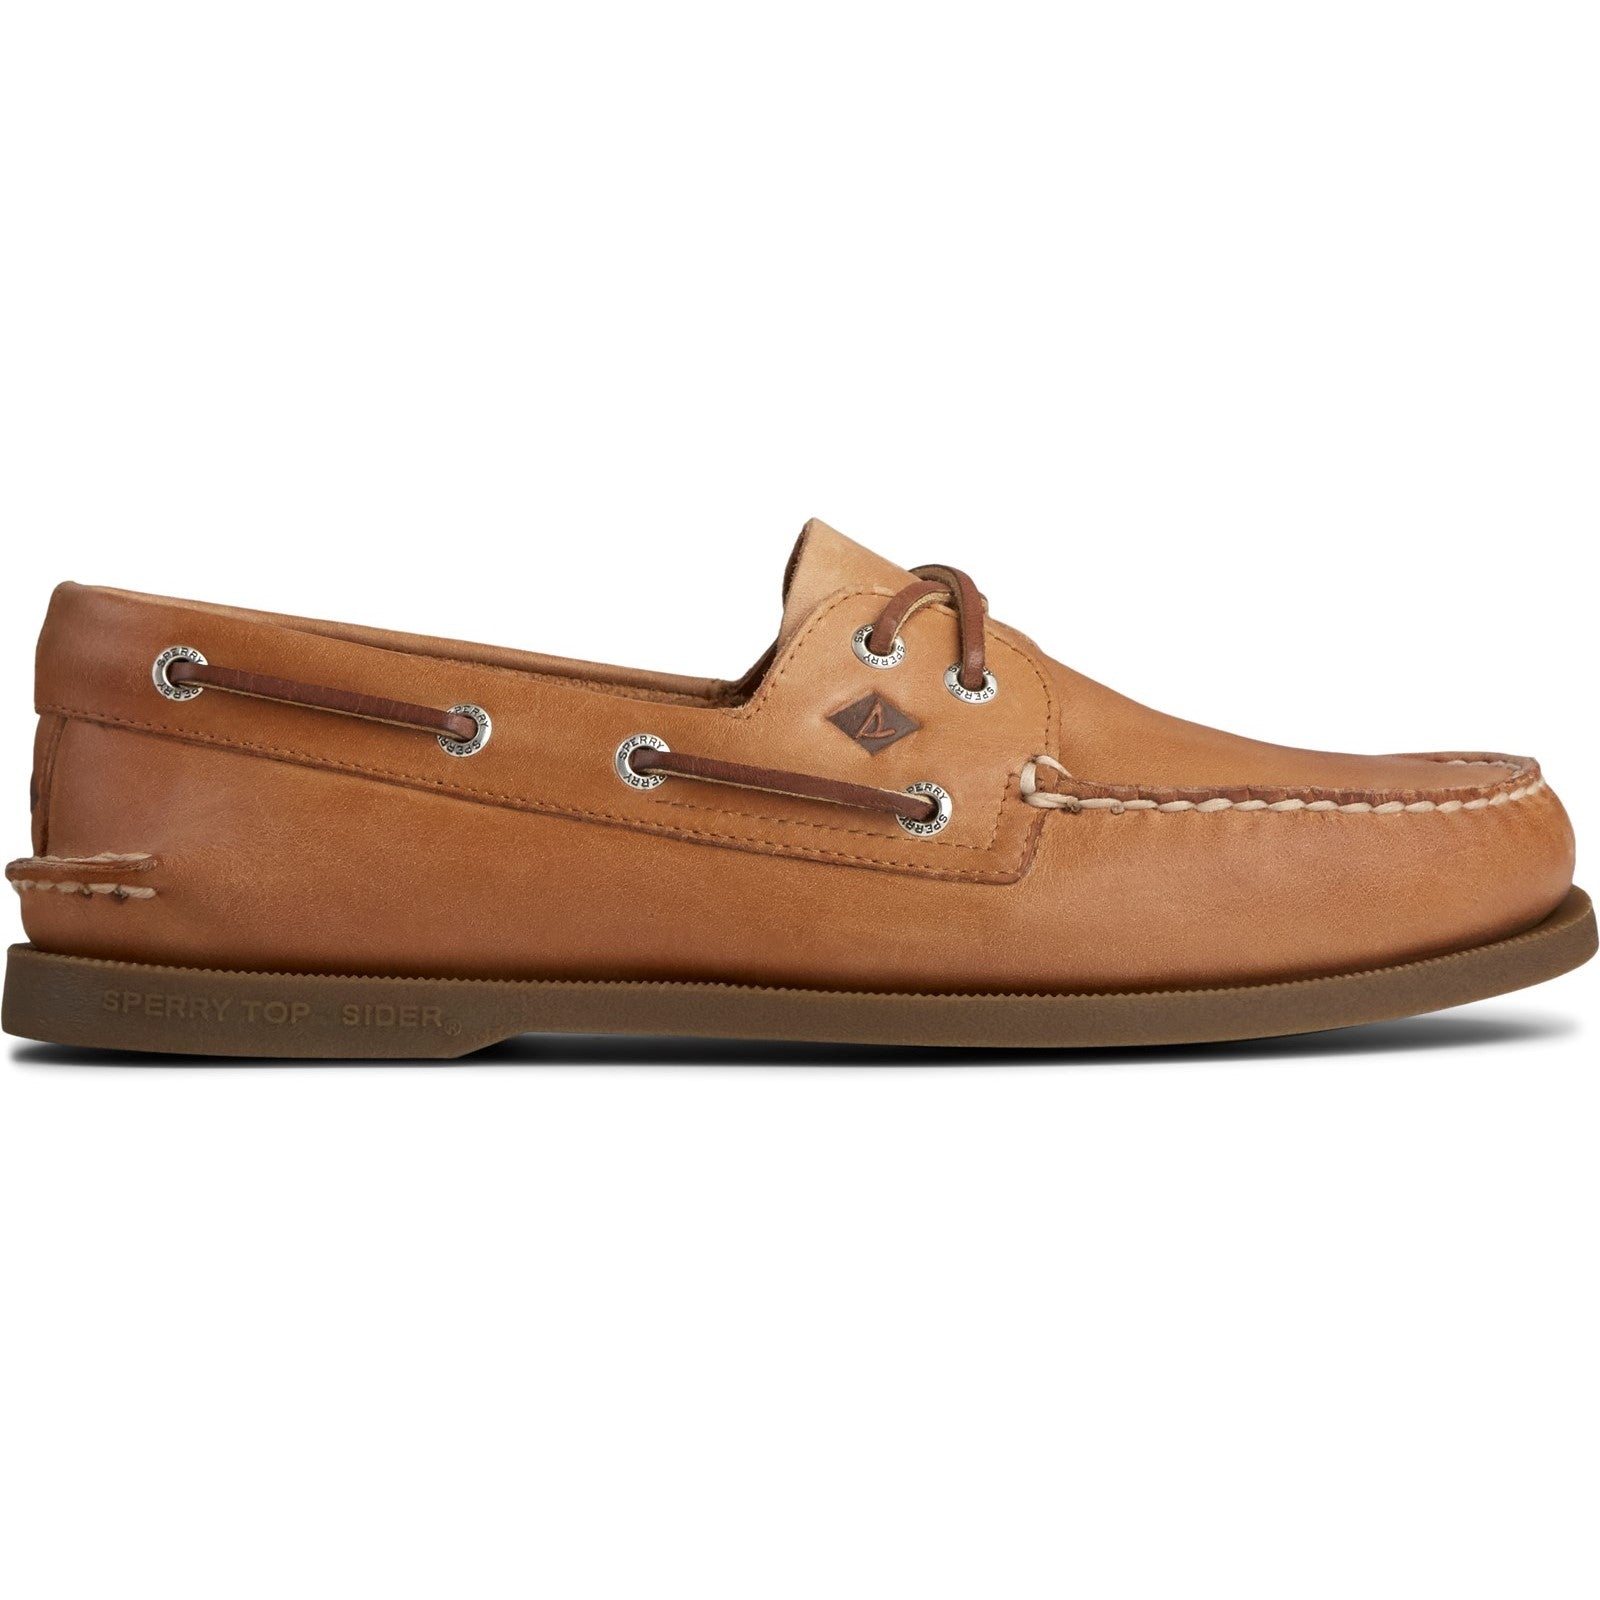 Sperry Mens Authentic Original Leather Boat Shoes - Tan